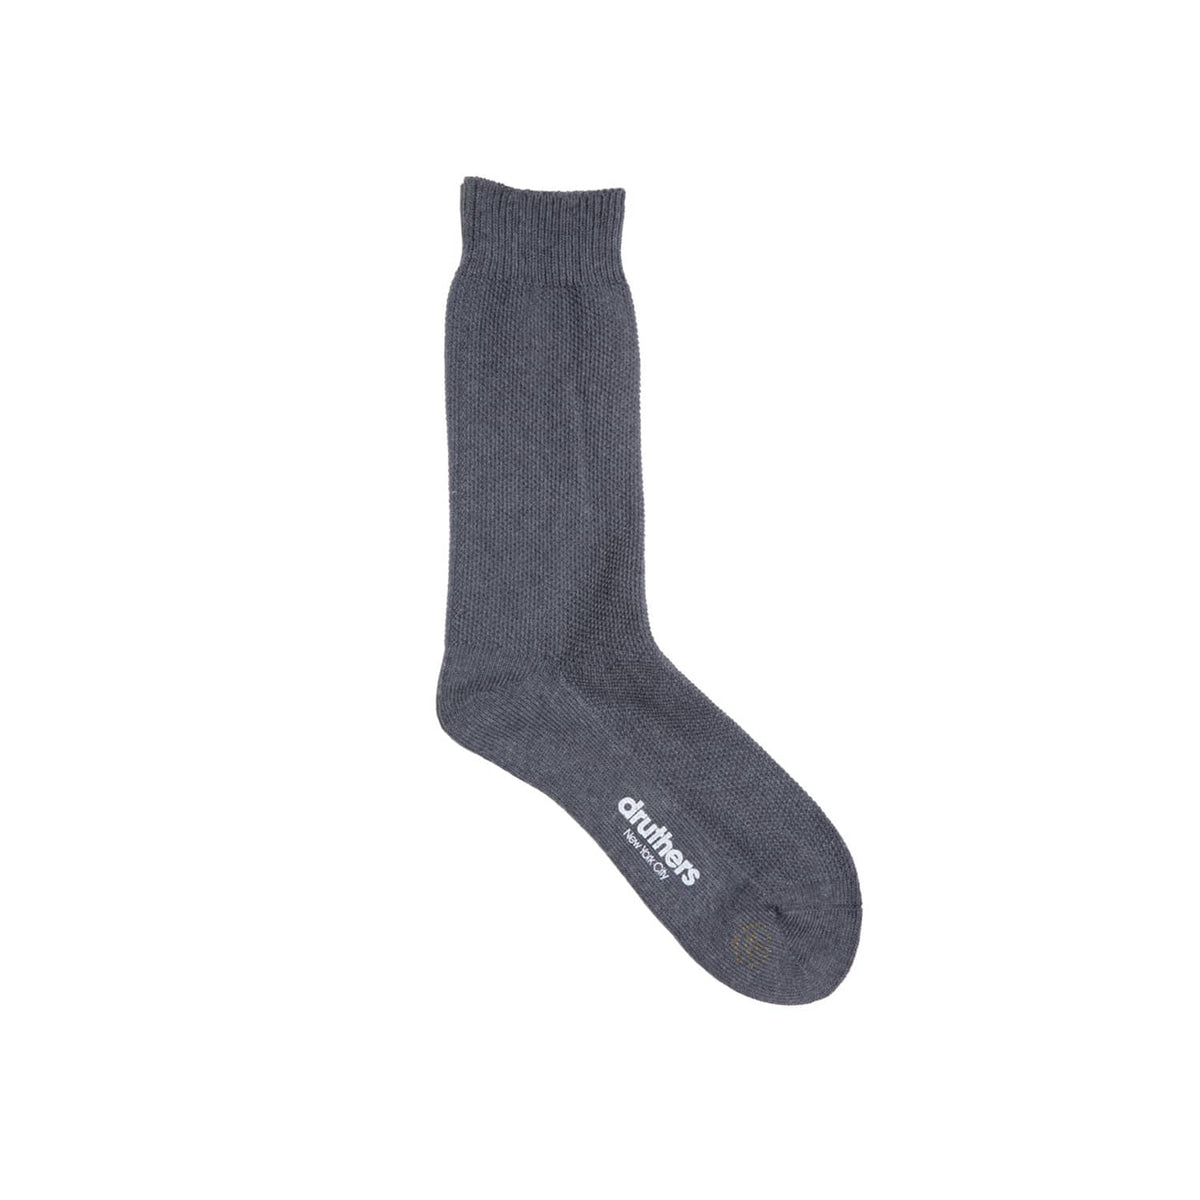 Druthers NYC Organic Cotton Pique Dress Sock